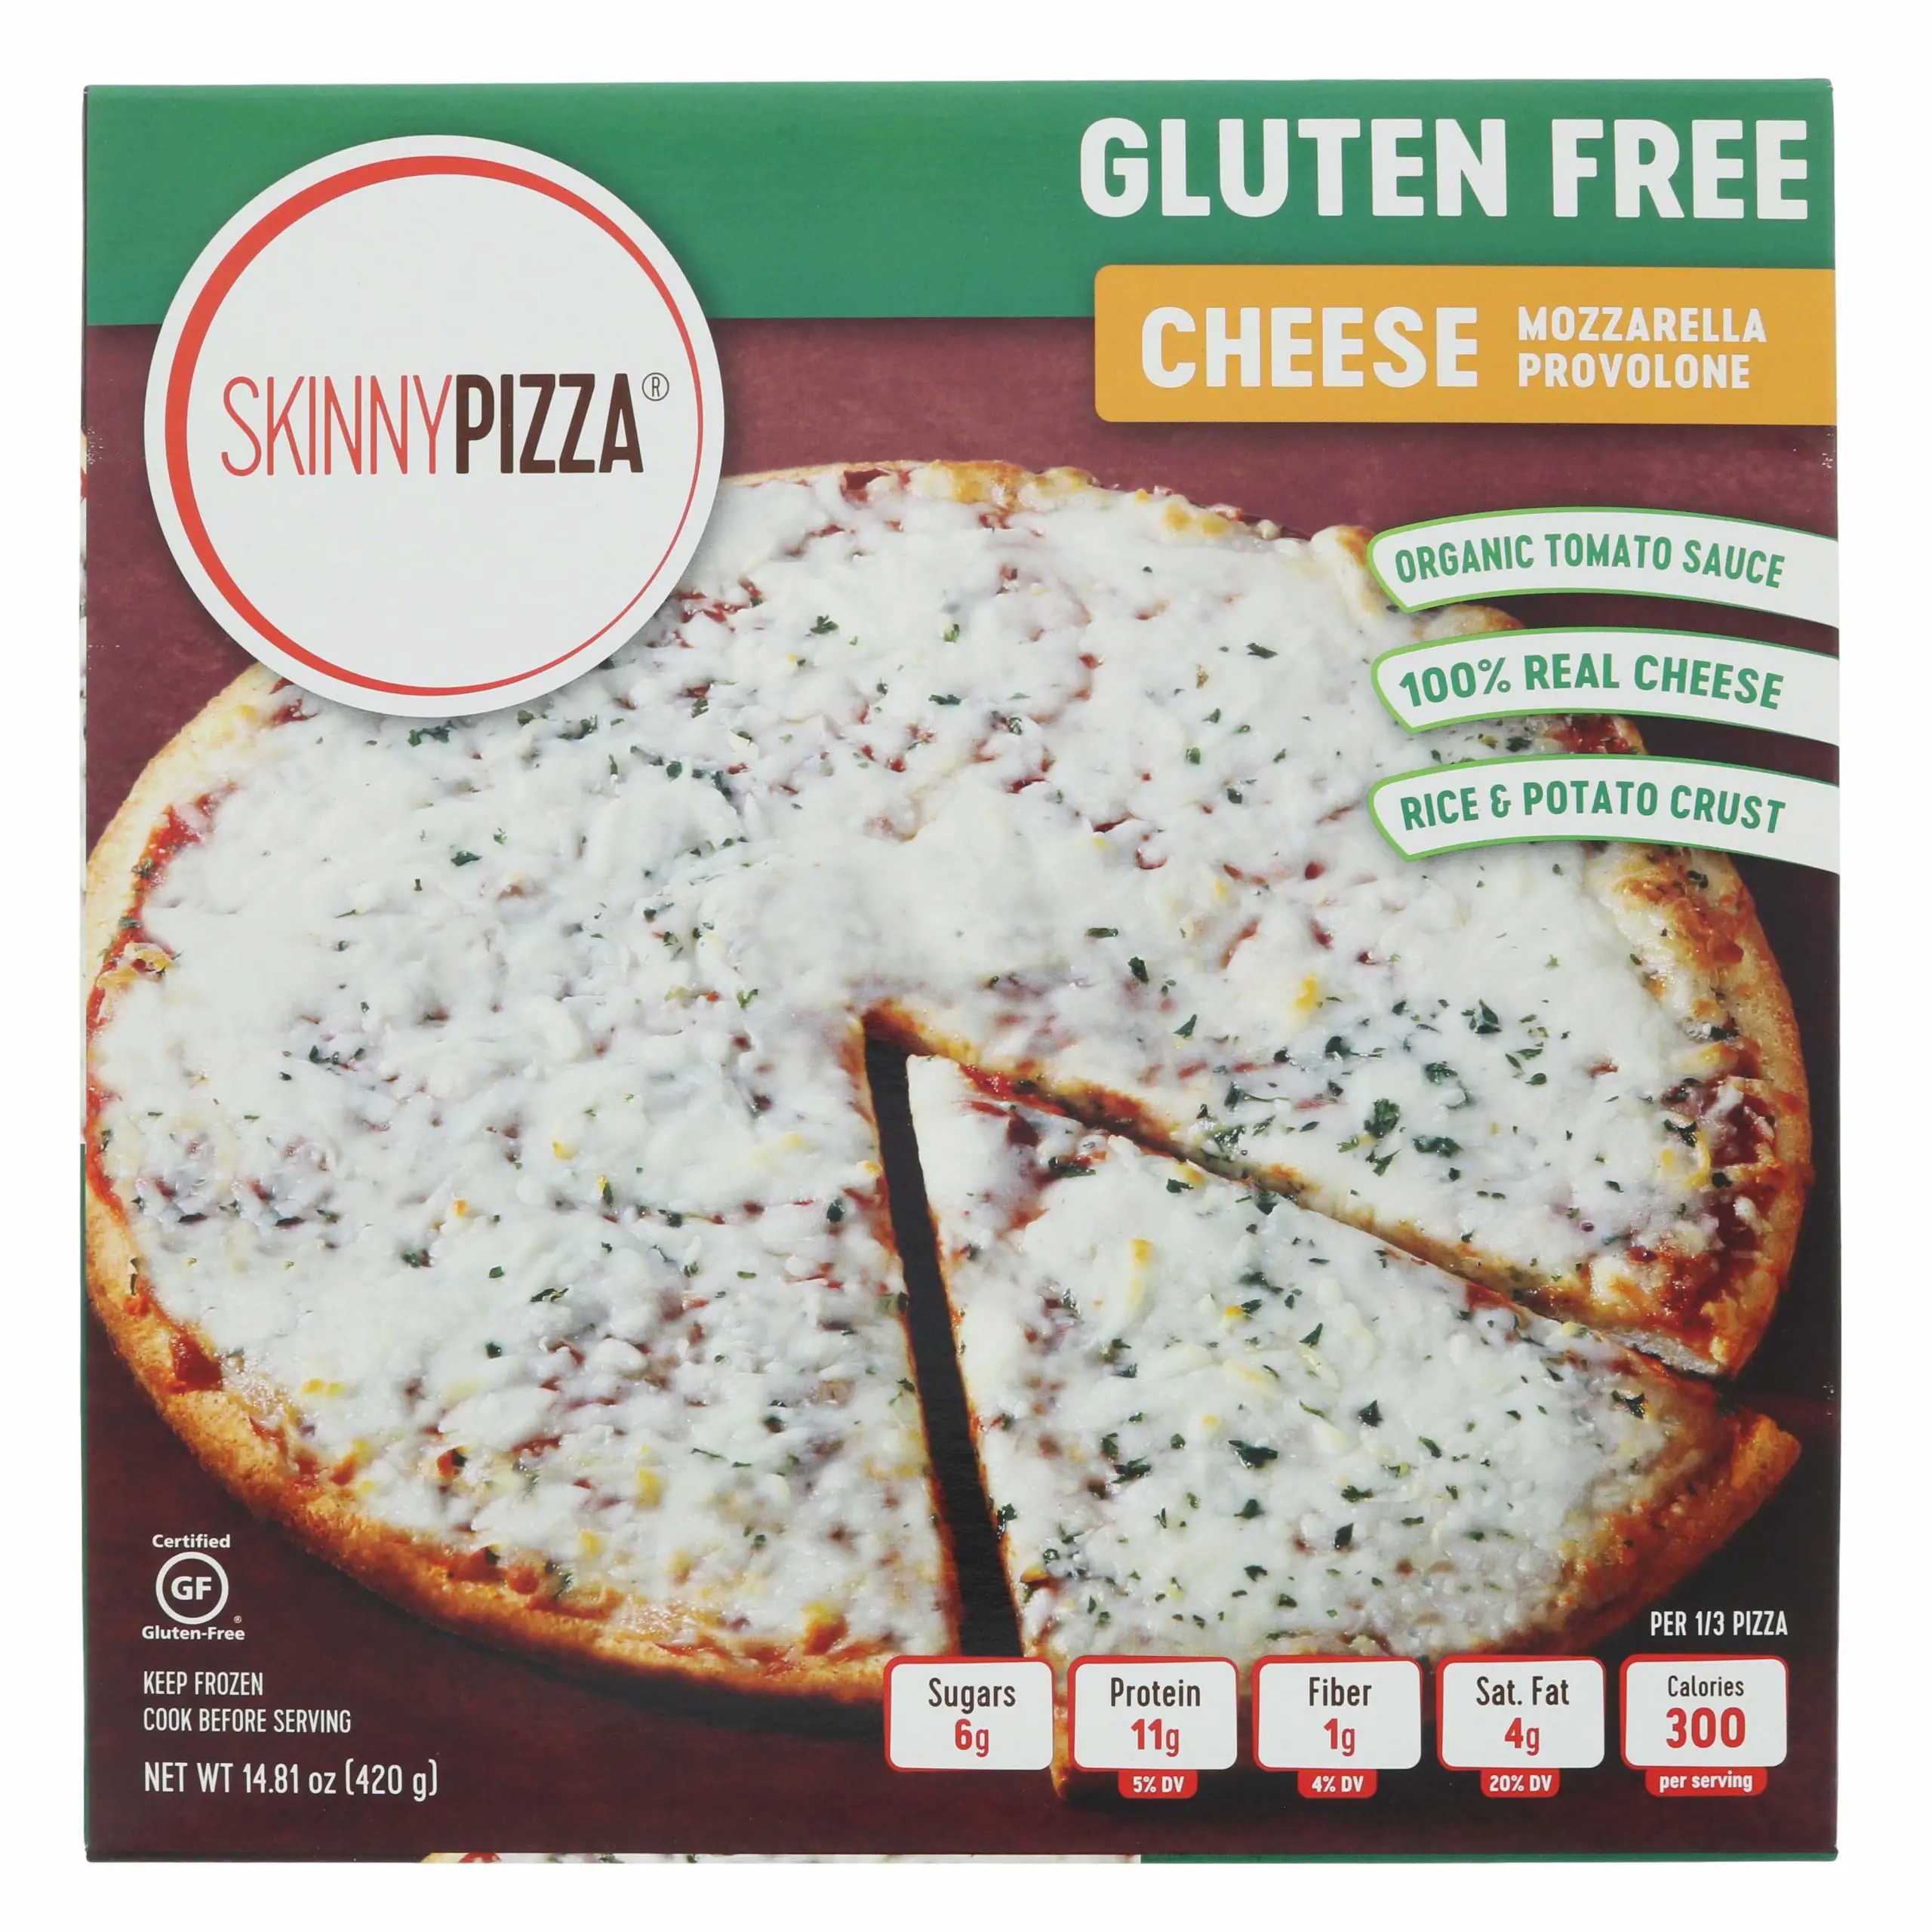 Skinny Pizza All Natural Cheese Gluten Free Pizza